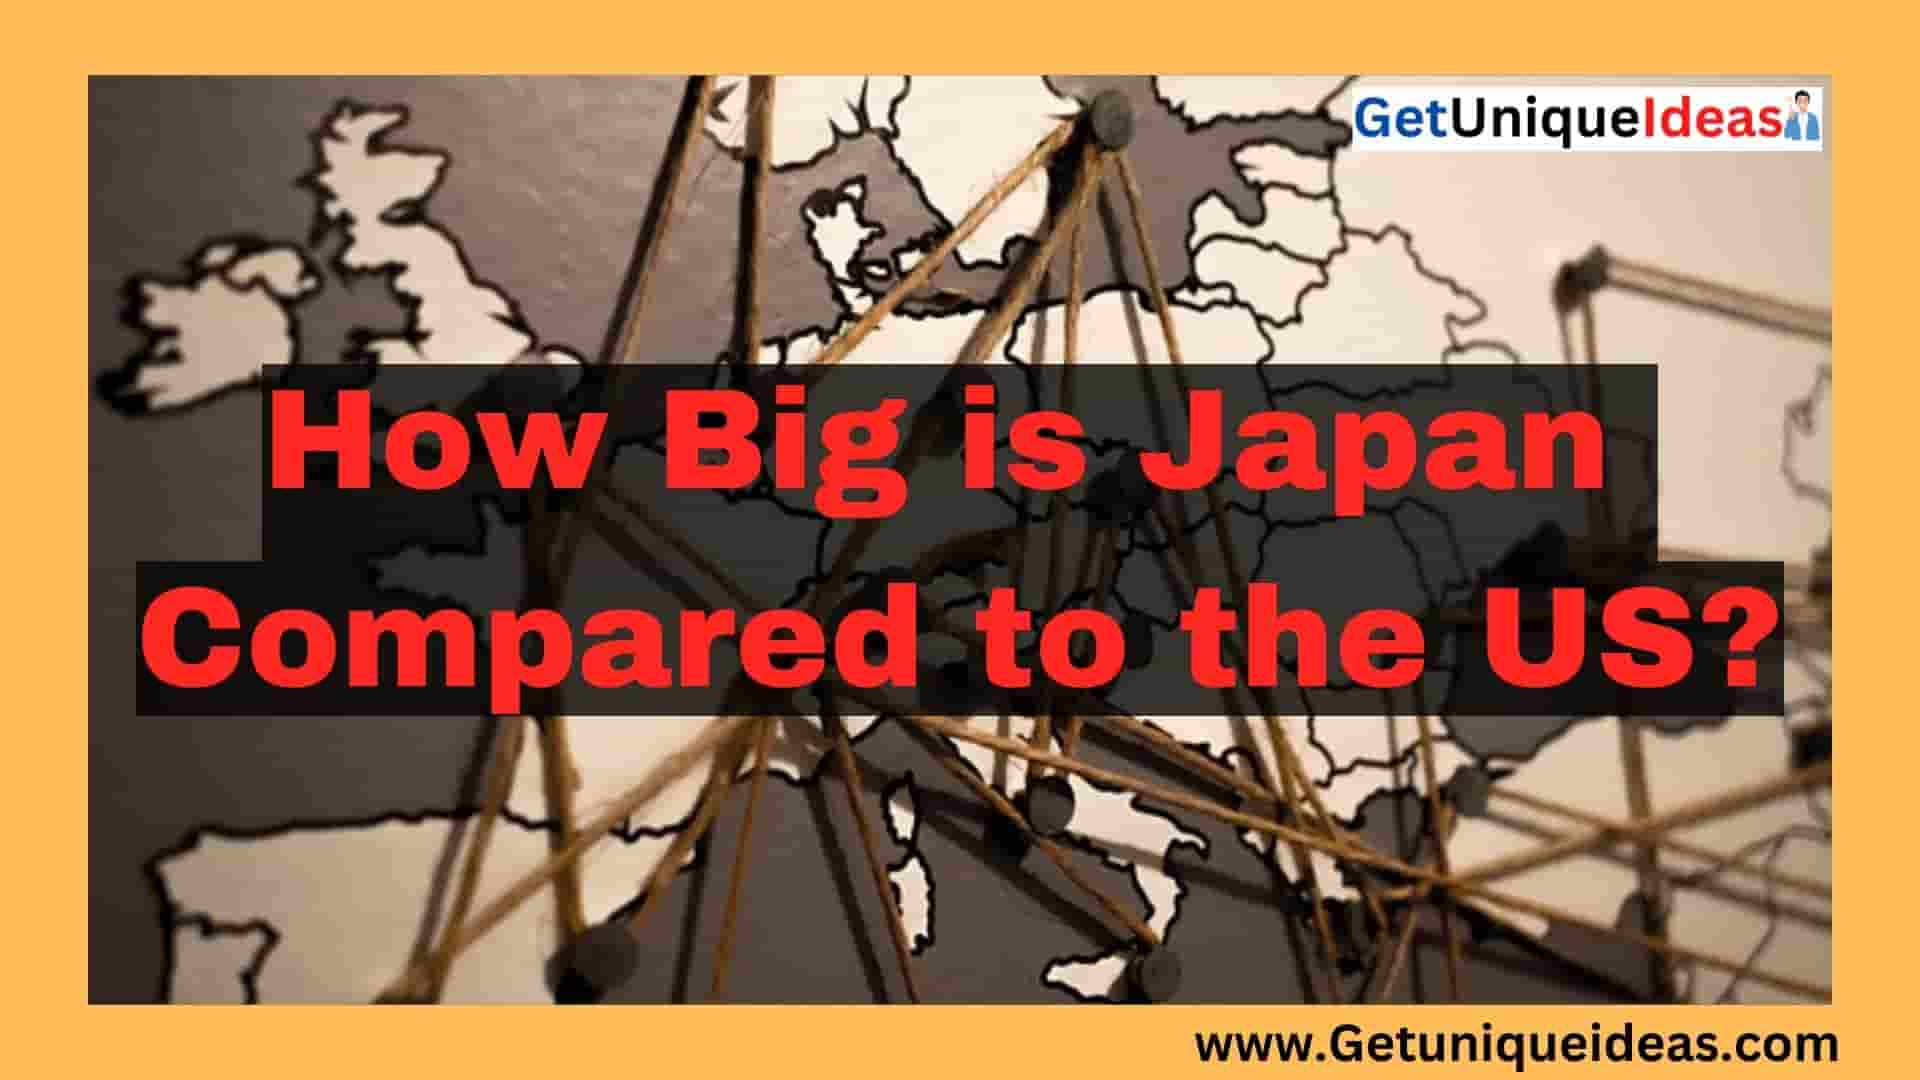 How Big is Japan Compared to the US?